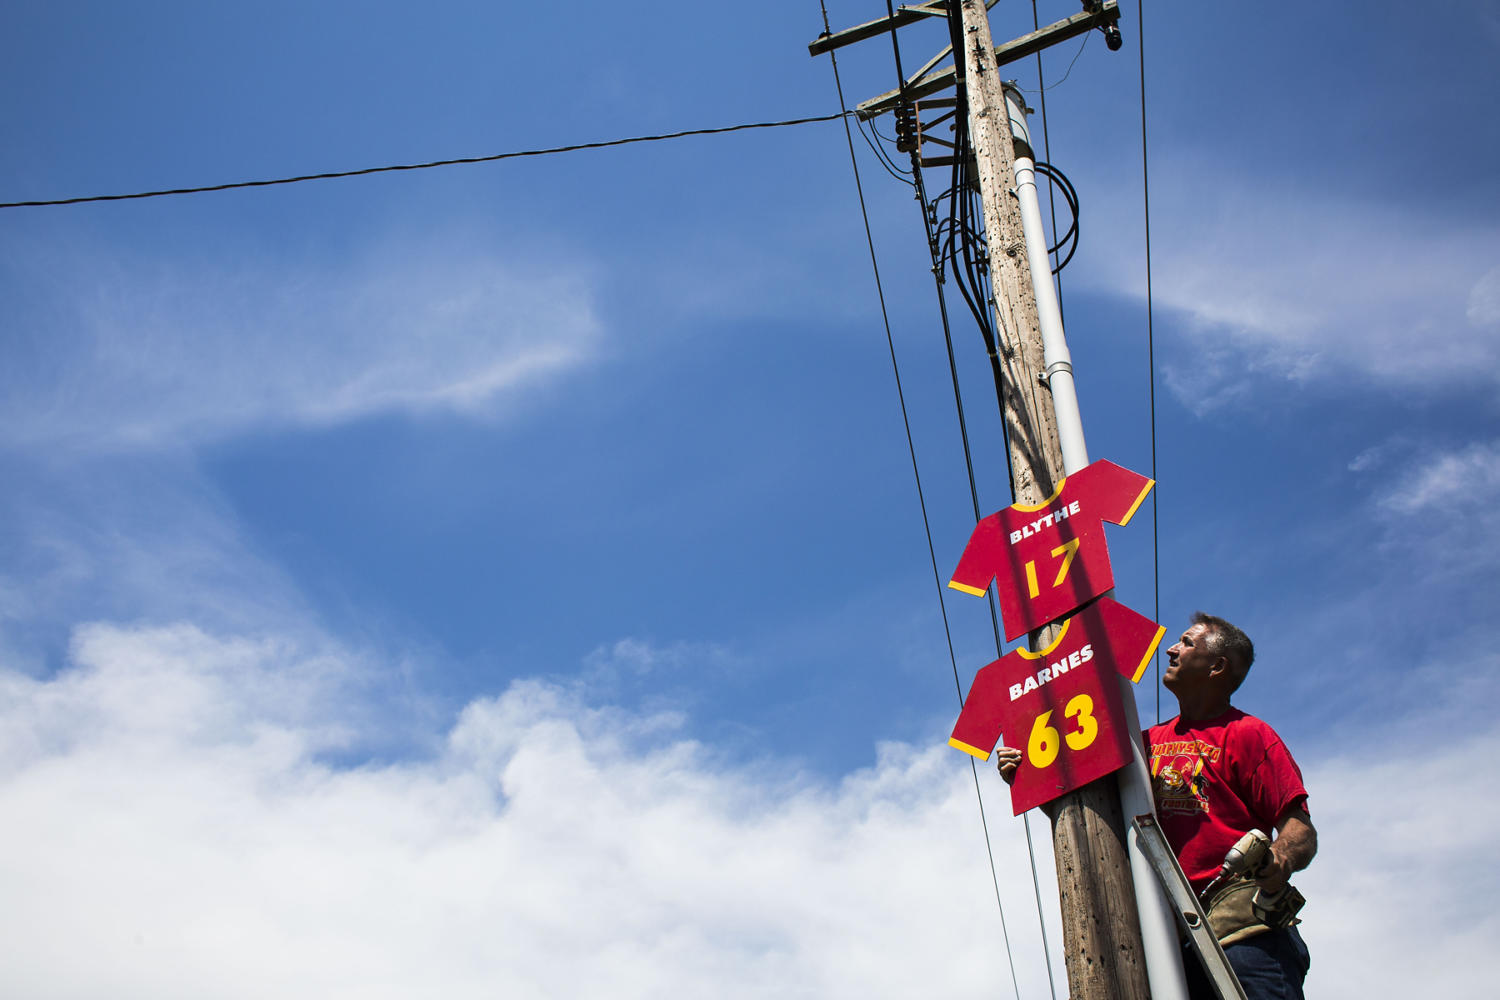 Mike Karg hangs Red Devils football jersey signs along North 14th Street prior to the 100th meeting between the Murphysboro Red Devils and the Carbondale Terriers on Friday, Aug. 25, 2017, in Murphysboro, Illinois. (Ryan Michalesko | @photosbylesko)